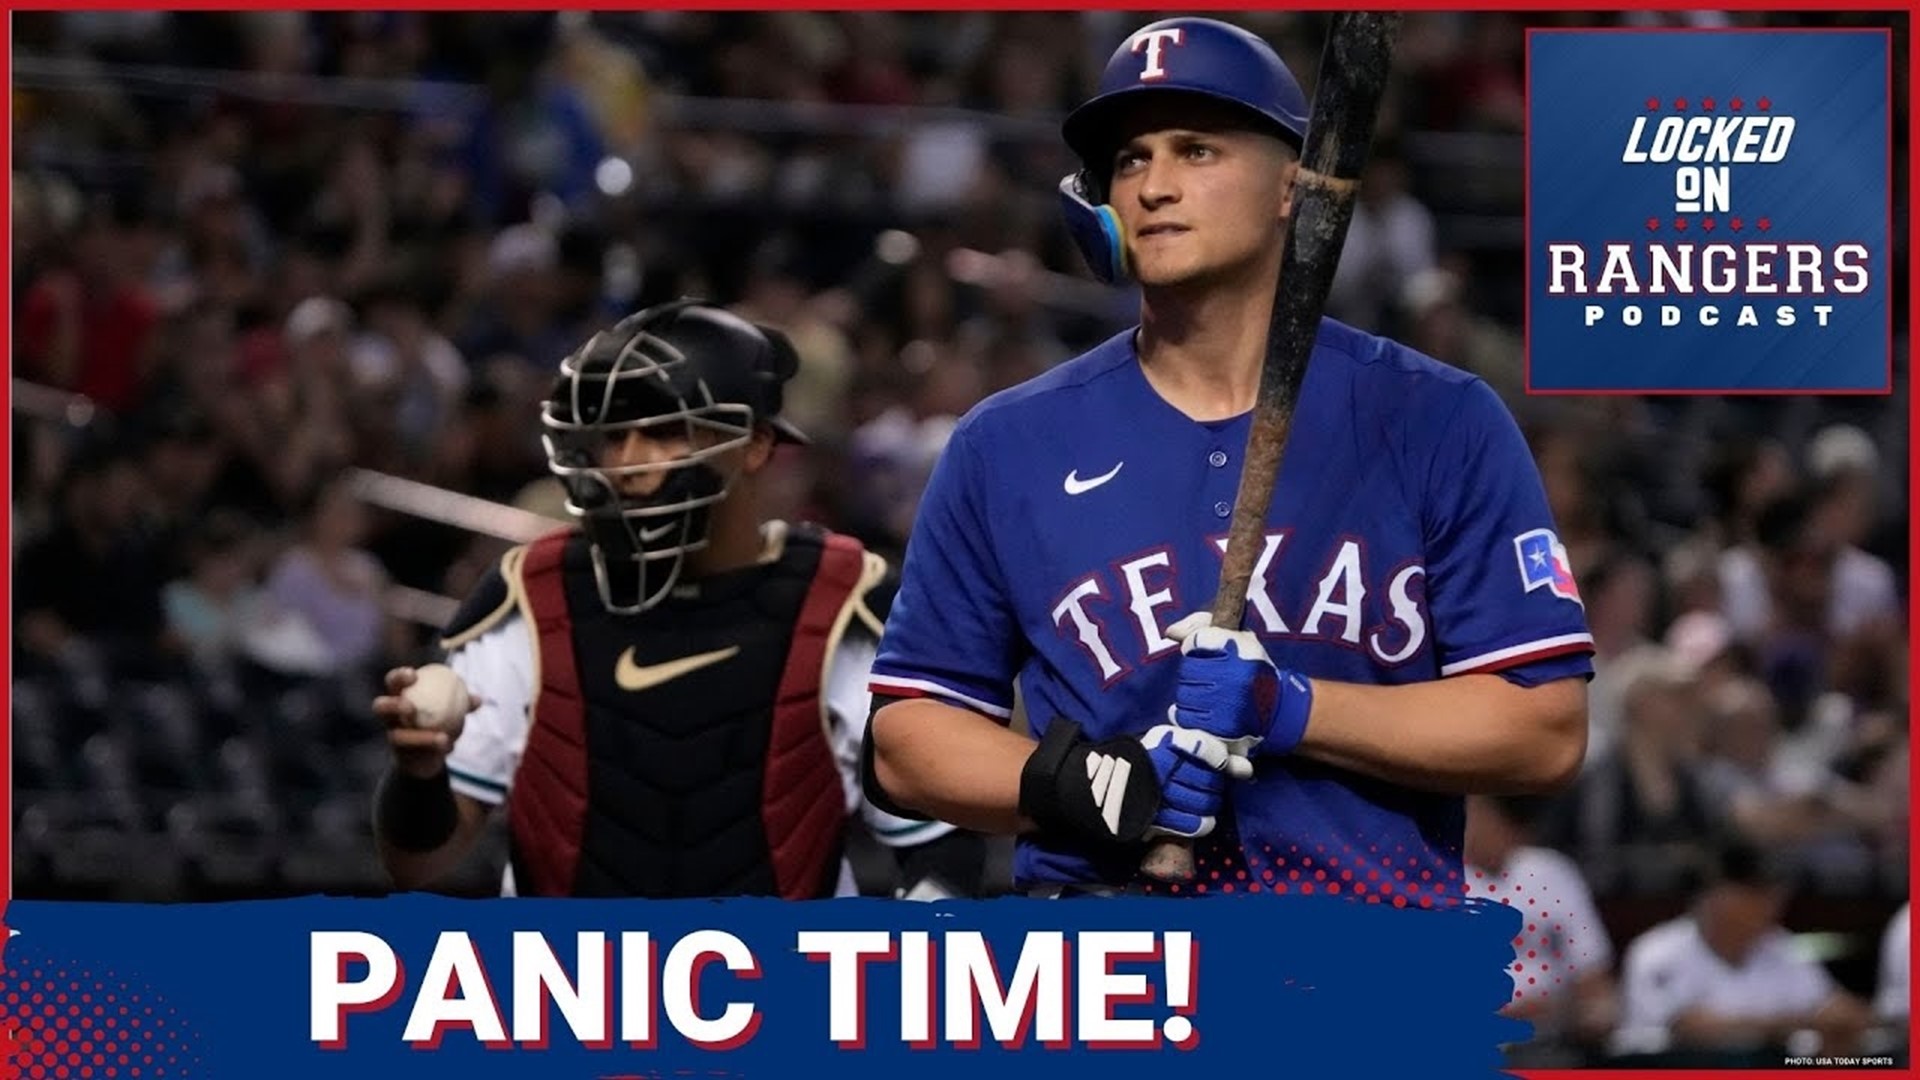 The Texas Rangers have their longest losing streak of the season as the Houston Astros and Seattle Mariners are hot on their tails.